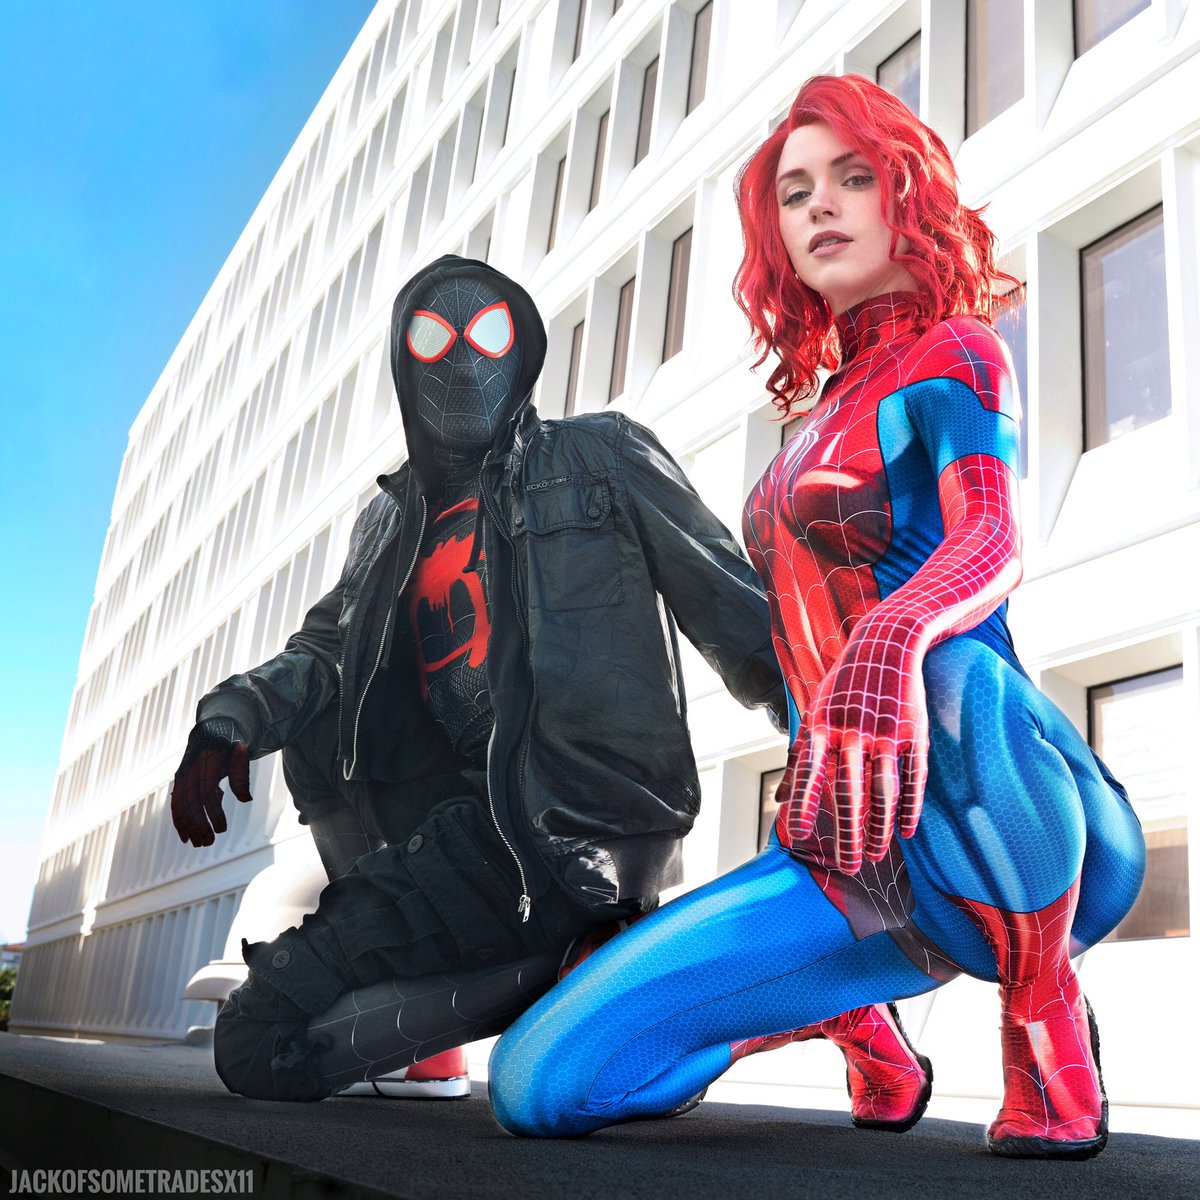 In honor of Across the Spider-verse, I wanted to share some of my favorite Spidey looks! 🕸️❤️ * 📸s 1, 2 3 from @GeekStrongTV Miles - @GeekStrongTV 📸4 - is jackofsometradesx11 * #spiderman #acrossthespiderverse @SpiderVerse @SonyPictures